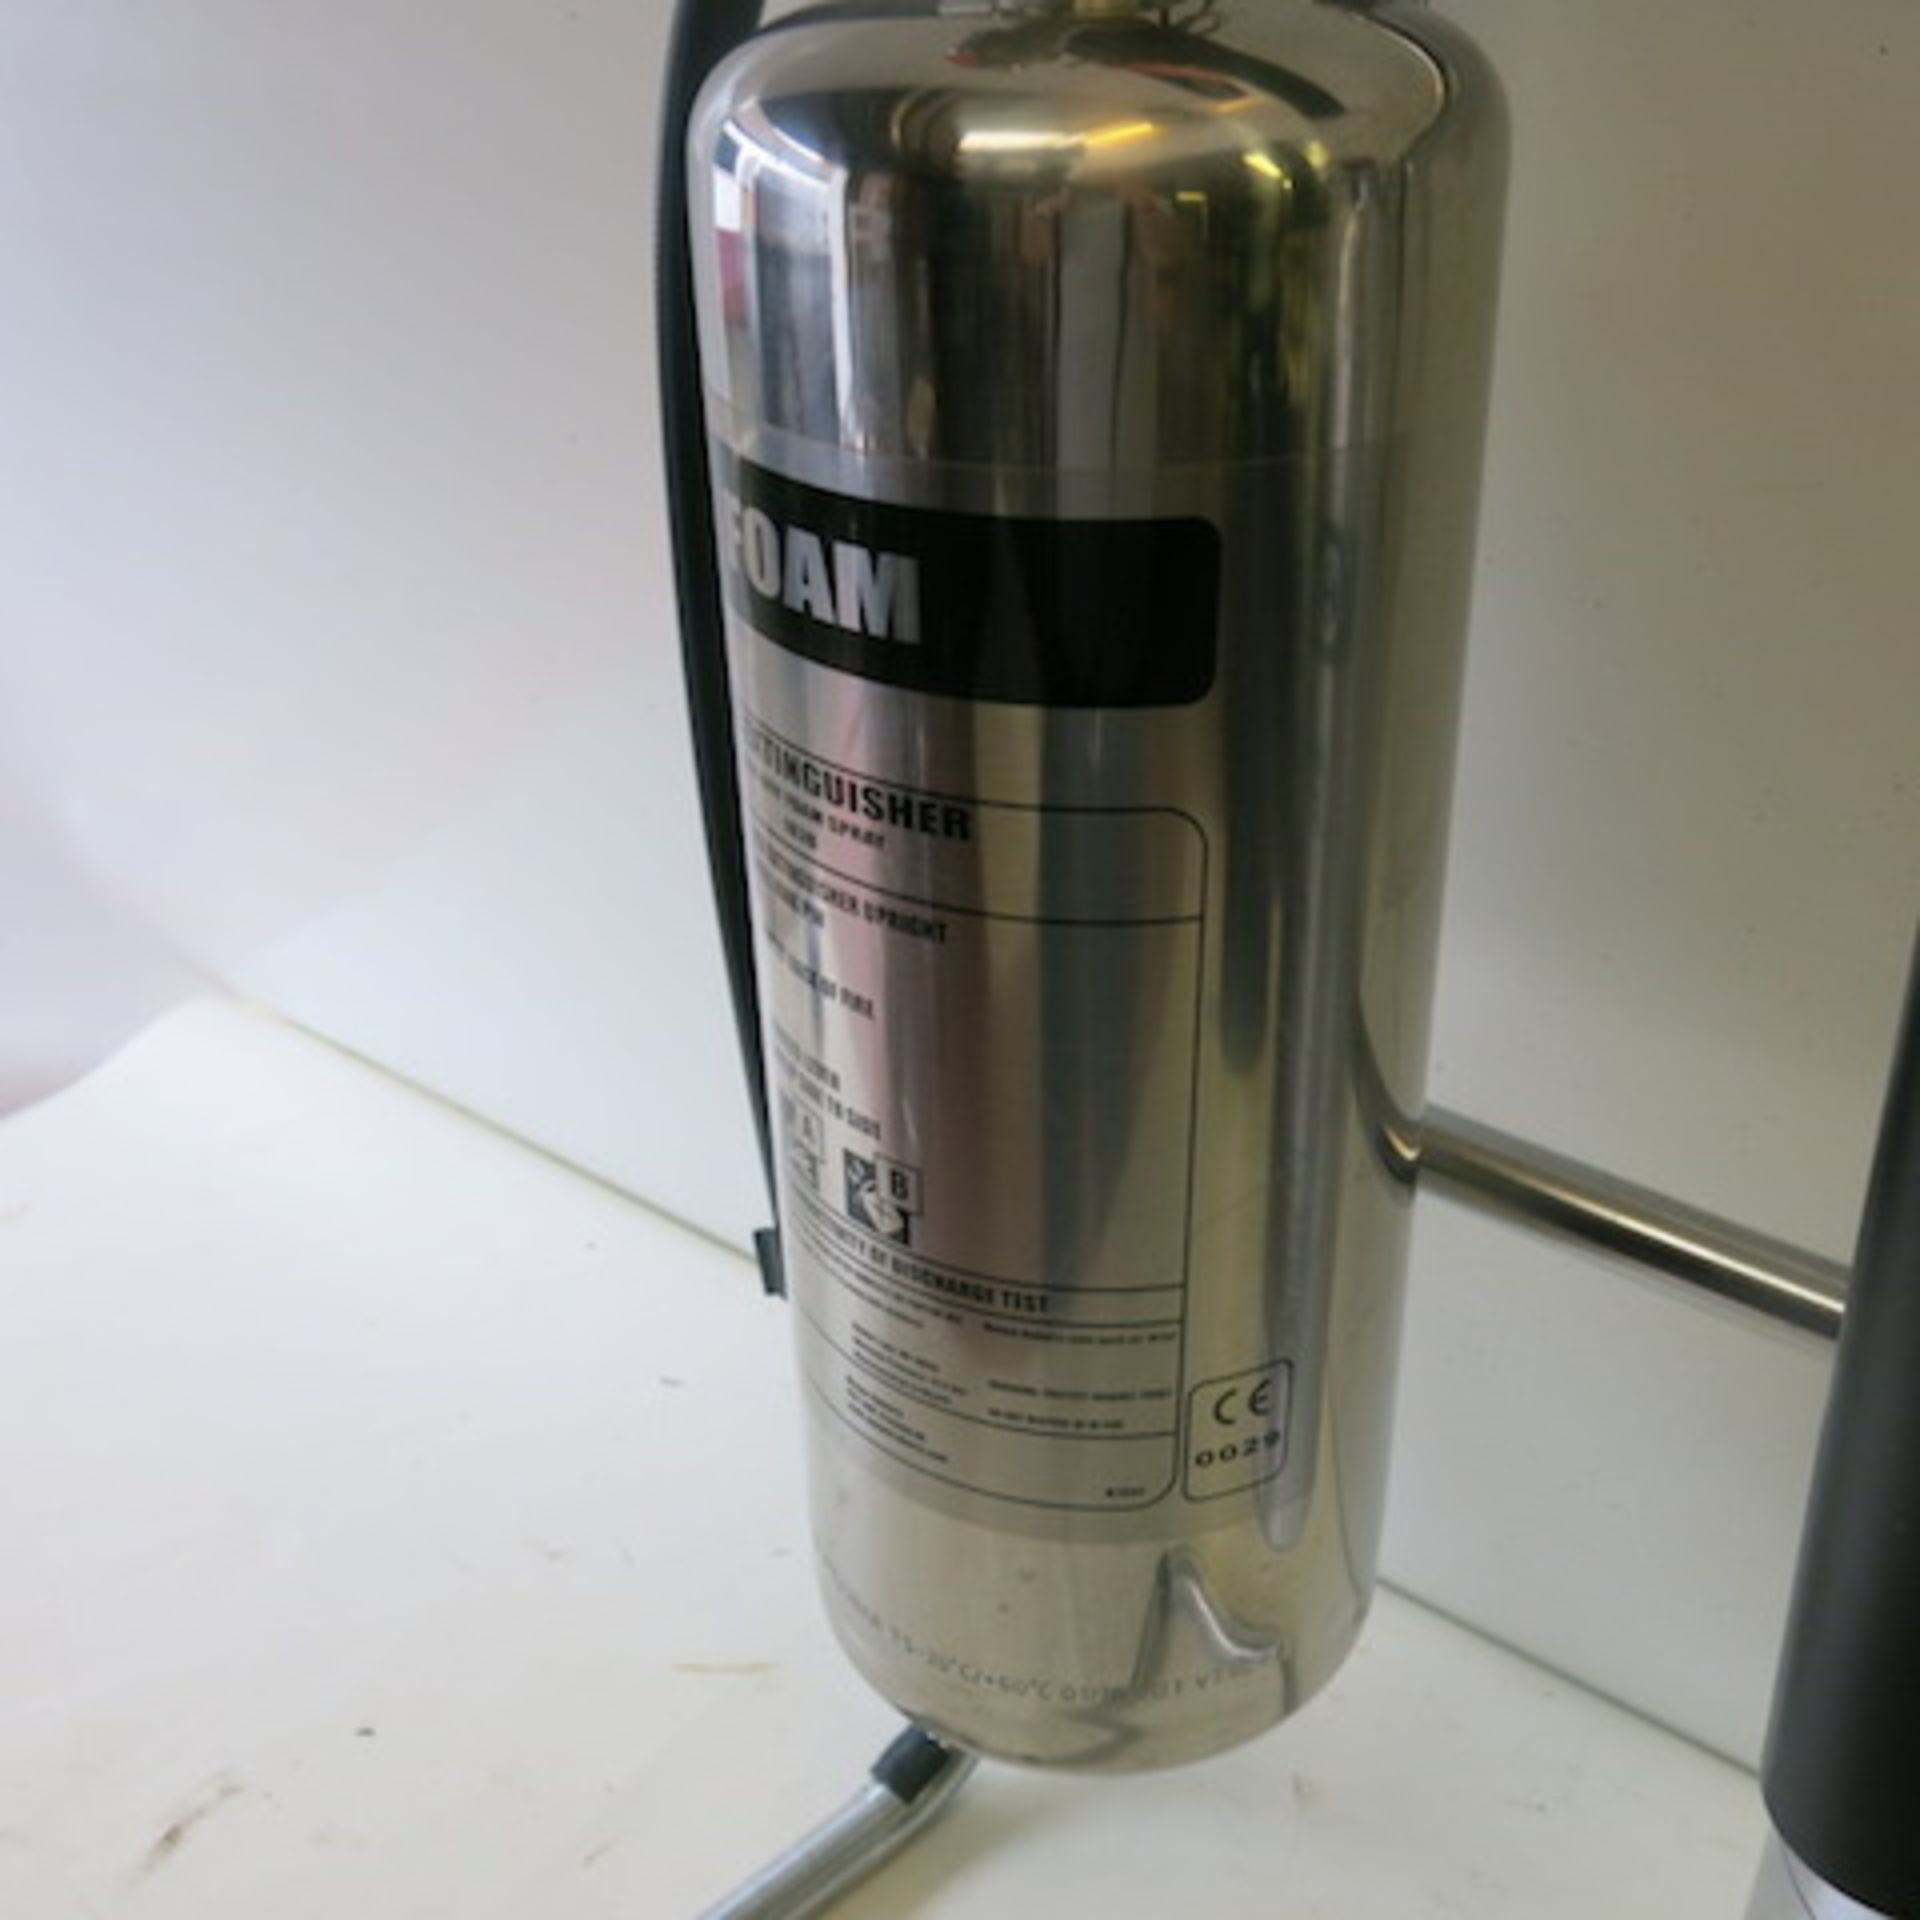 2 x Stainless Steel/Aluminum Fire Extinguishers on Frame, 1 Foam, 1 Carbon Dioxide, Discharge Date - Image 2 of 4